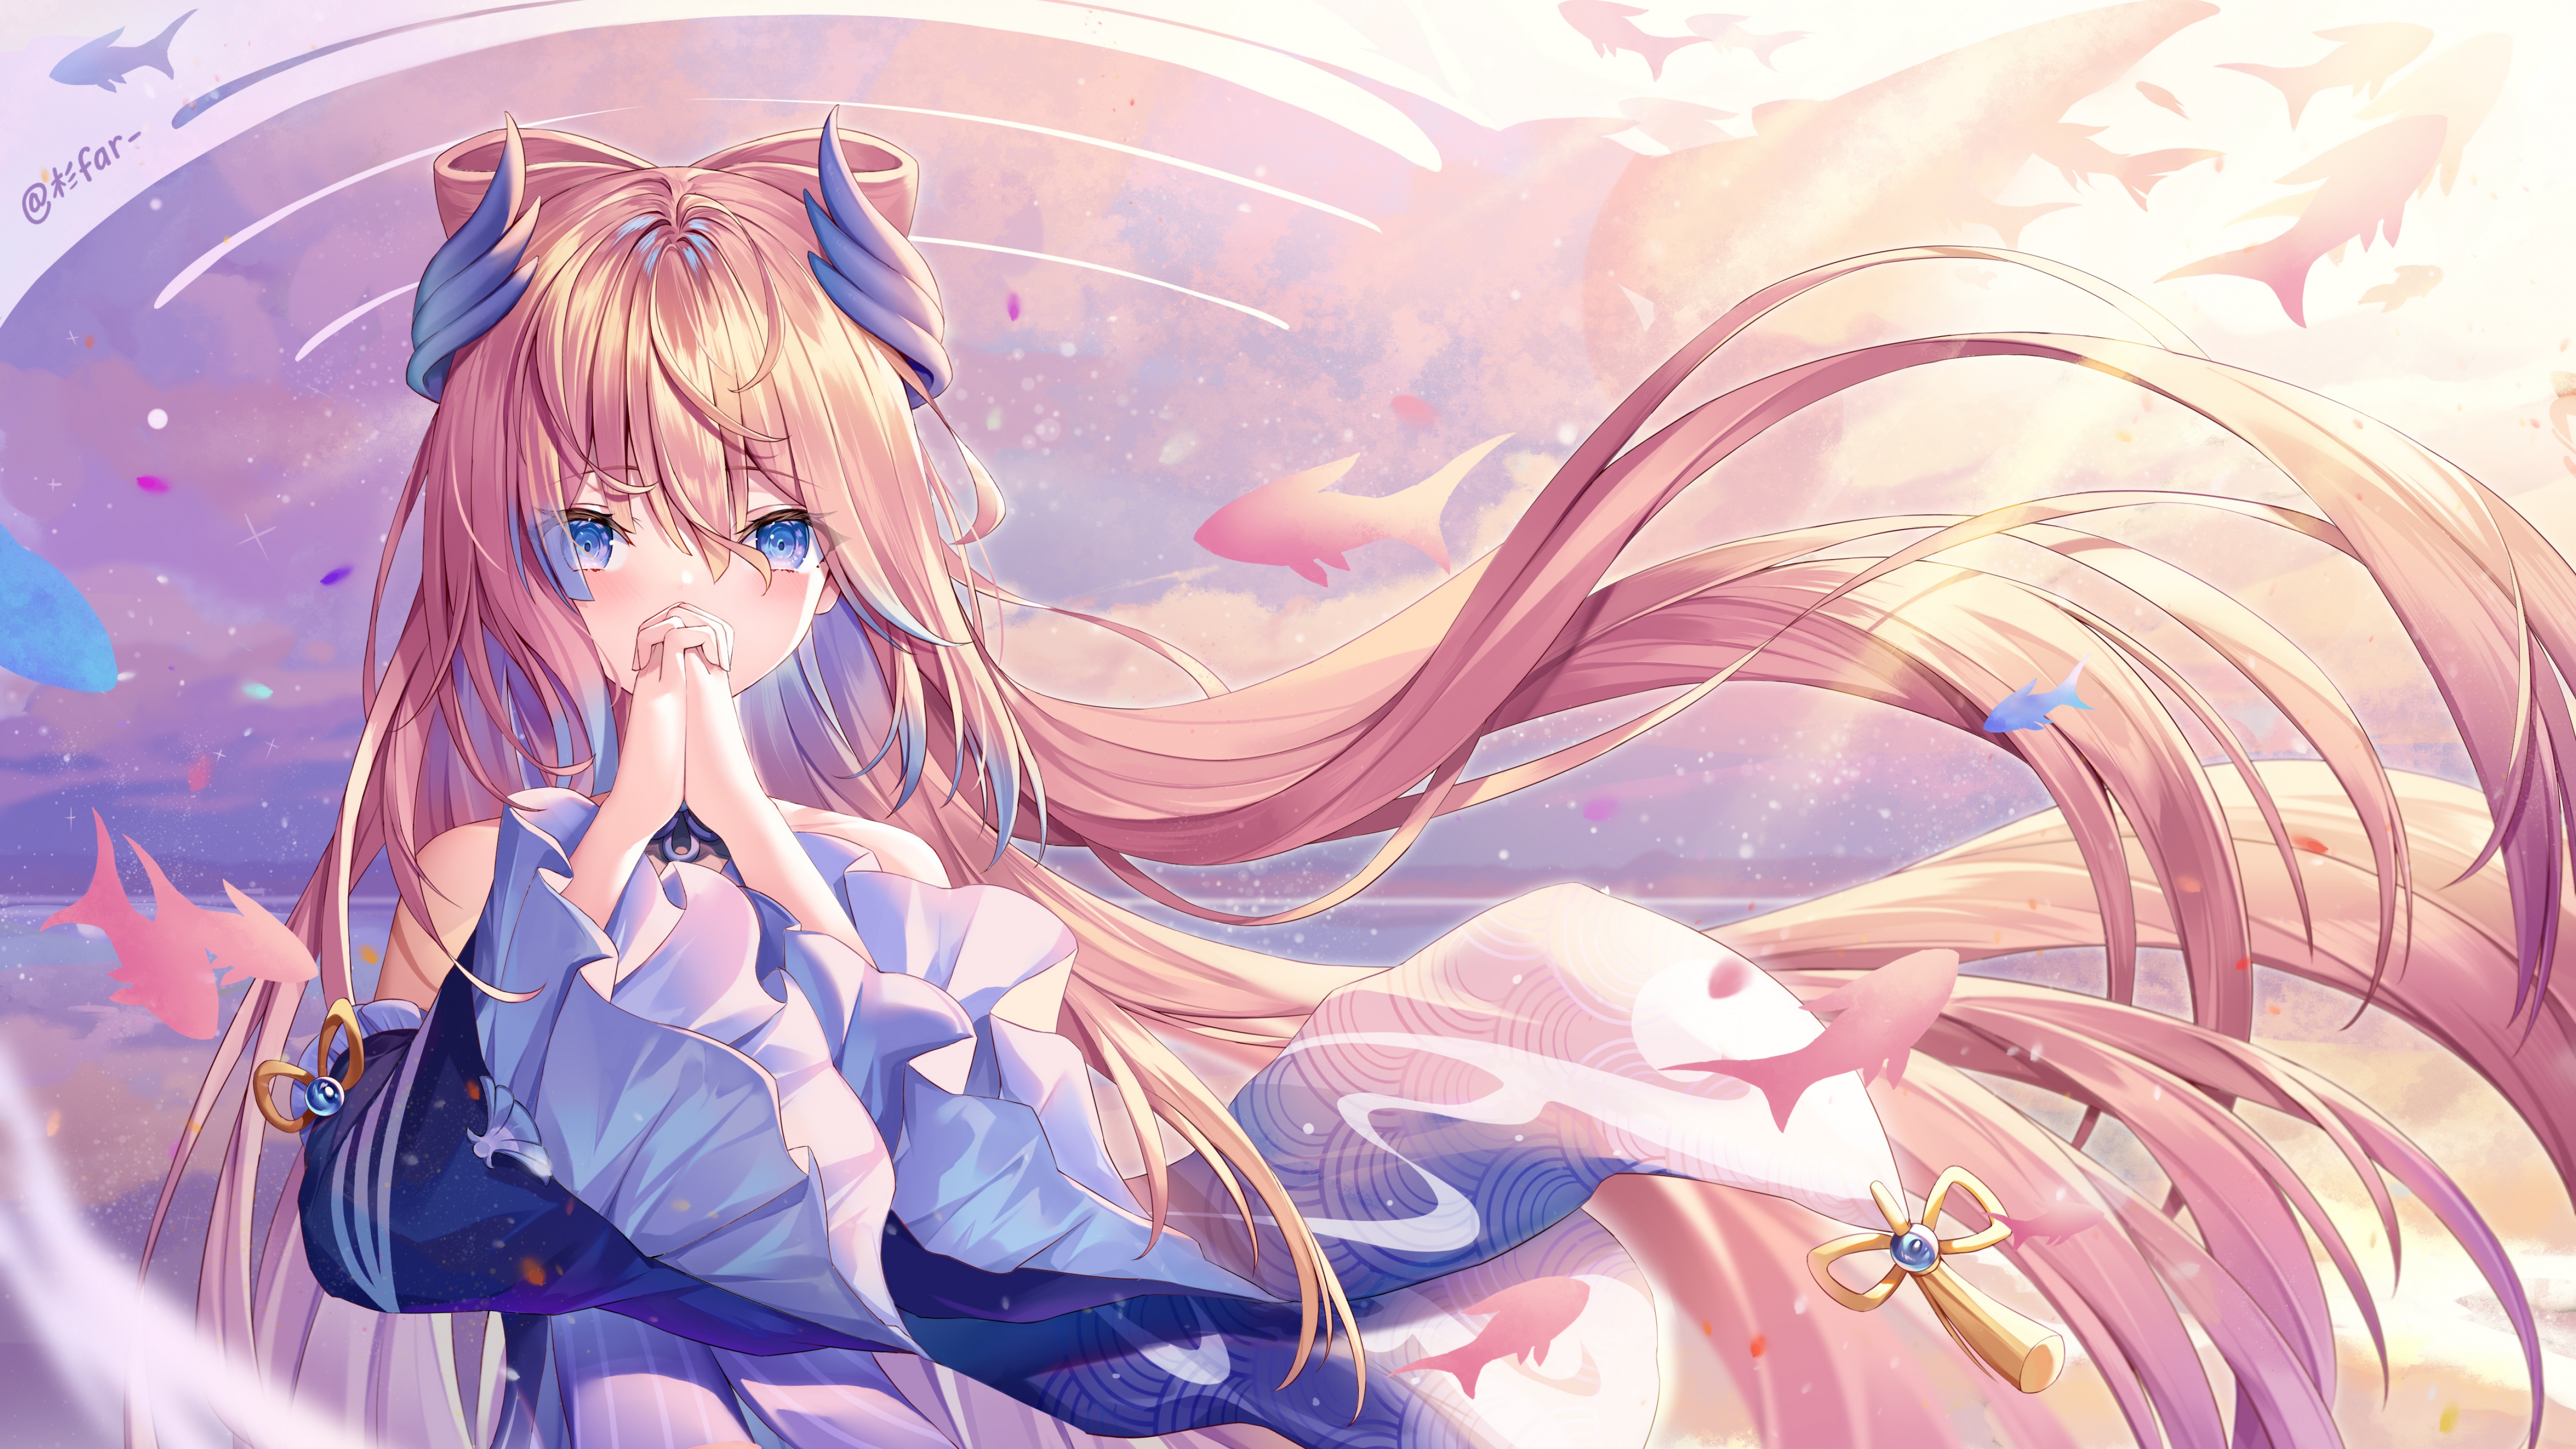 Anime Girl Queen Autumn Leaves HD Anime Girl Wallpapers  HD Wallpapers   ID 92723